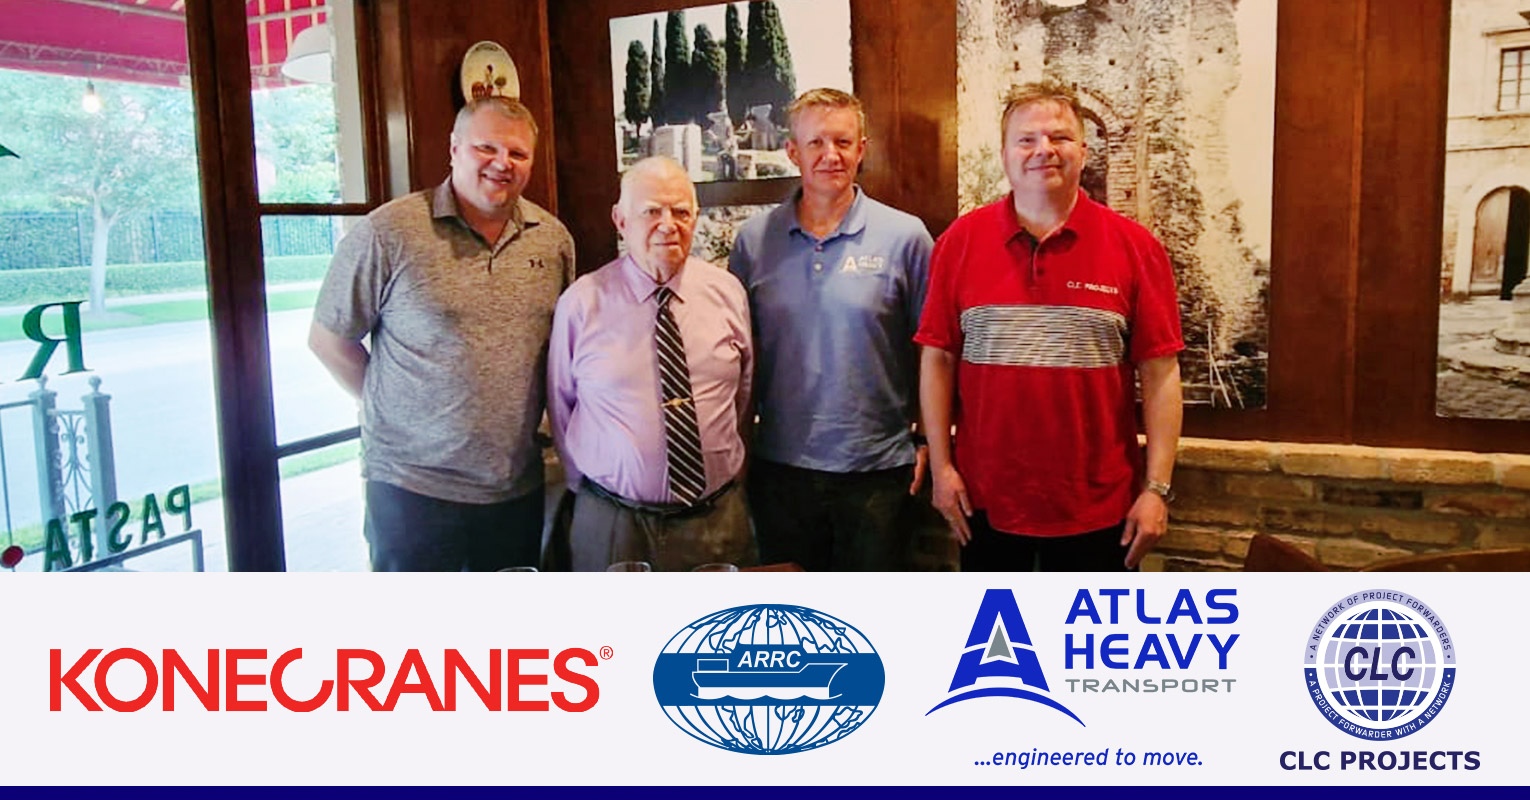 CLC Projects Chairman meeting with Rick Shannon of ARRC Line, Jussi Suhonen of Konecranes and Anders Pedersen of ATLAS Heavy Transport in Houston